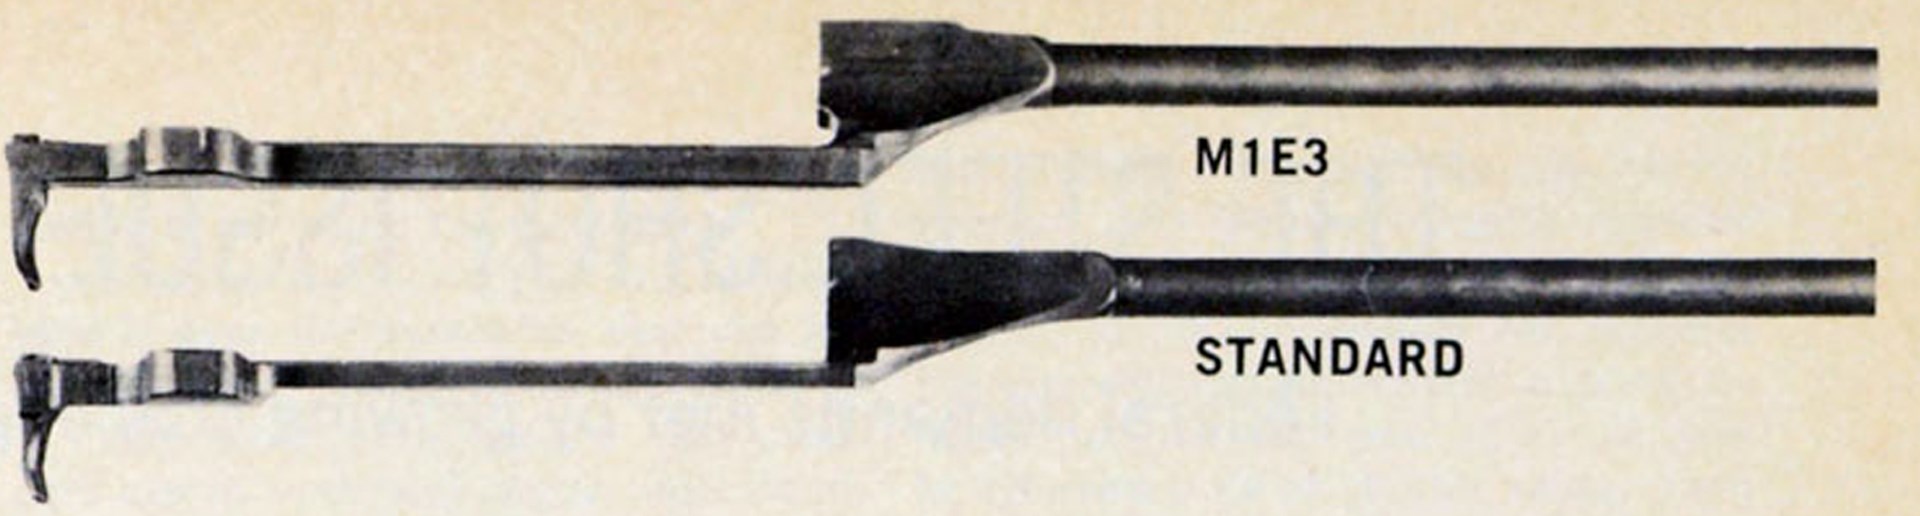 M1 and M1E3 operating rods